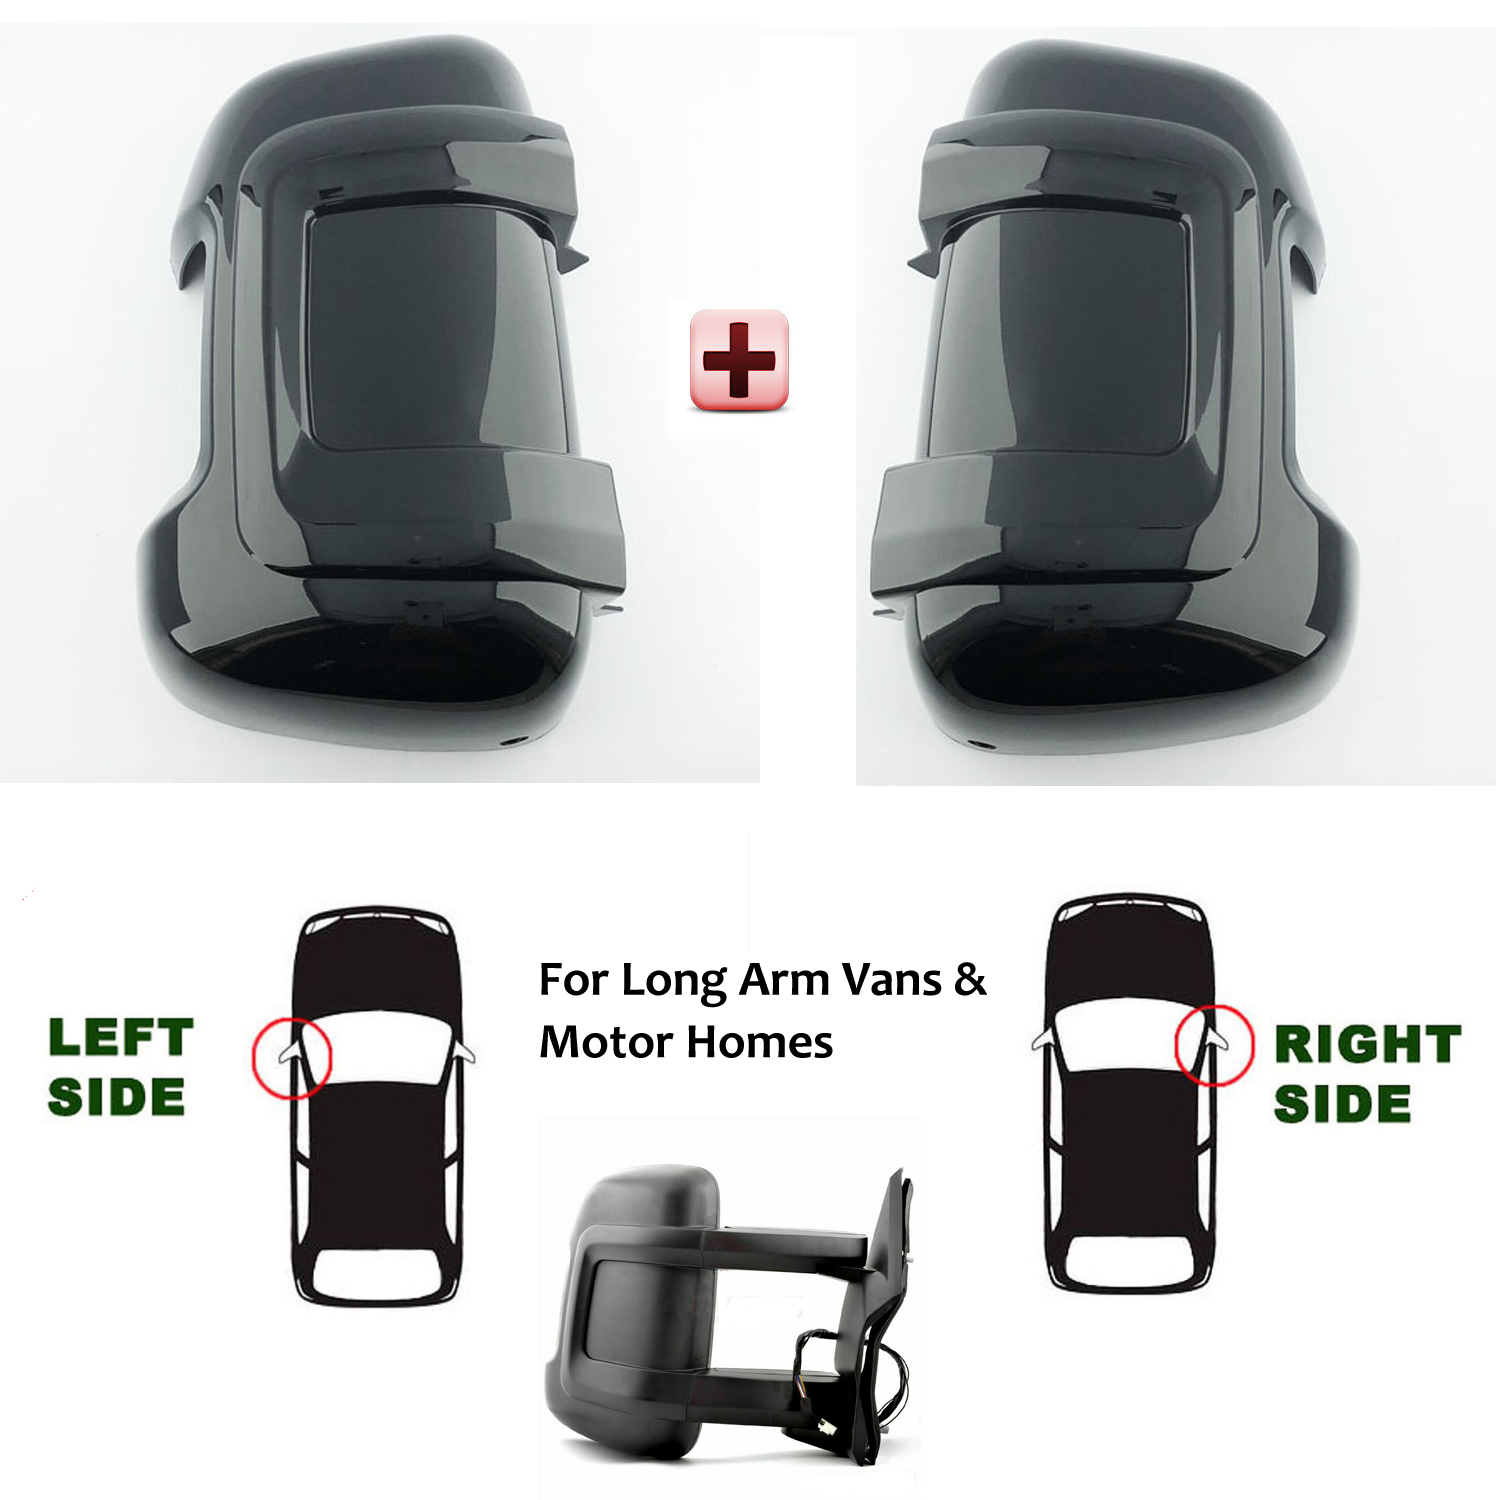 FIAT Ducato Wing Mirror Cover Protectors LEFT and RIGHT (PAIR ) 2006 to 2021 – Gloss BLACK Wing Mirror Cover Protector ( LONG Arm Vans )